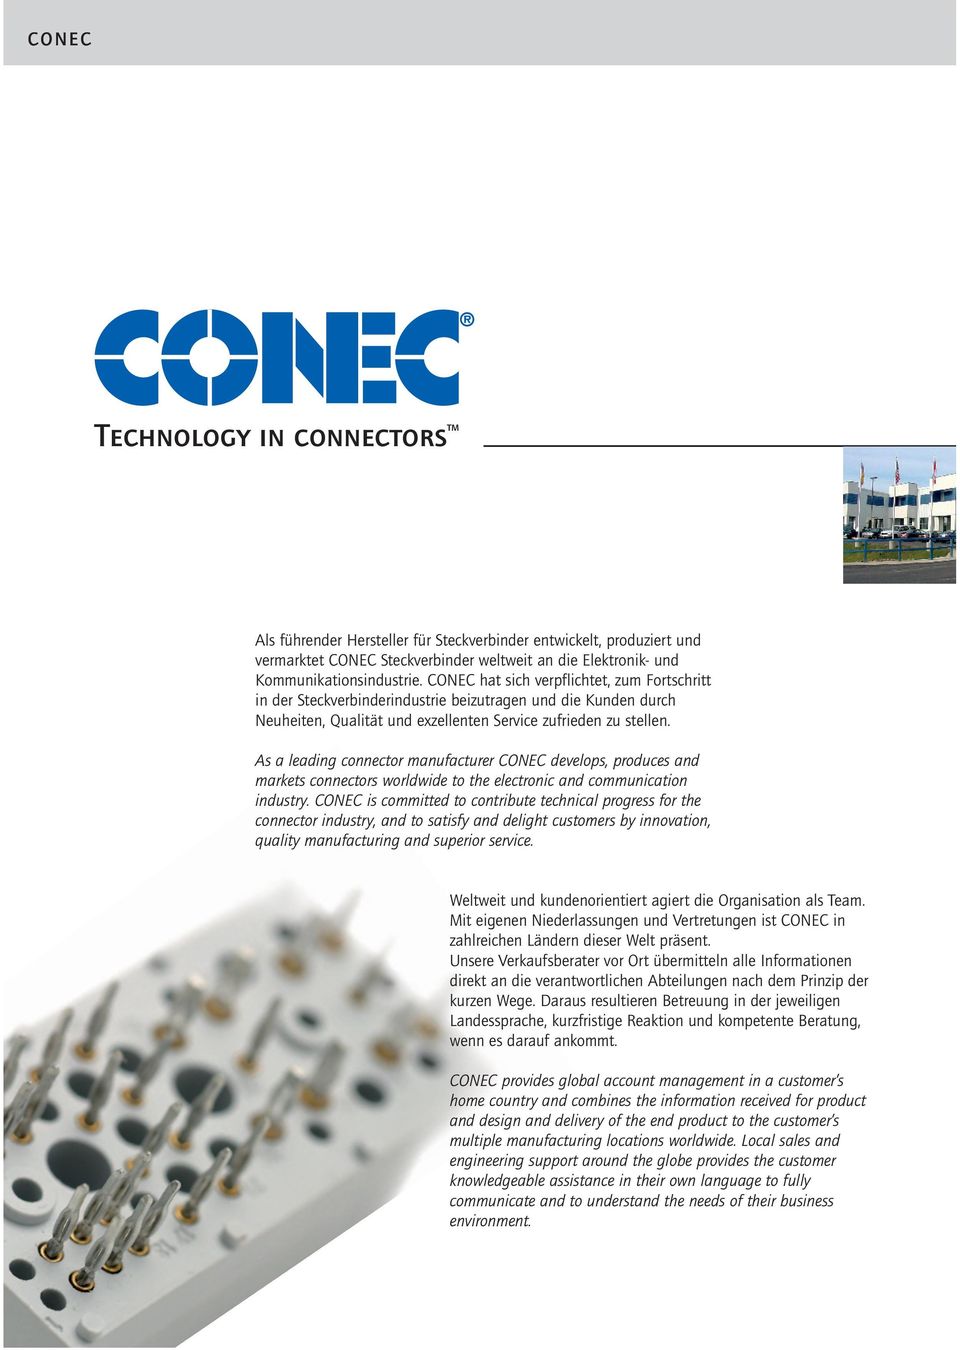 As a leading connector manufacturer CONEC develops, produces and markets connectors worldwide to the electronic and communication industry.